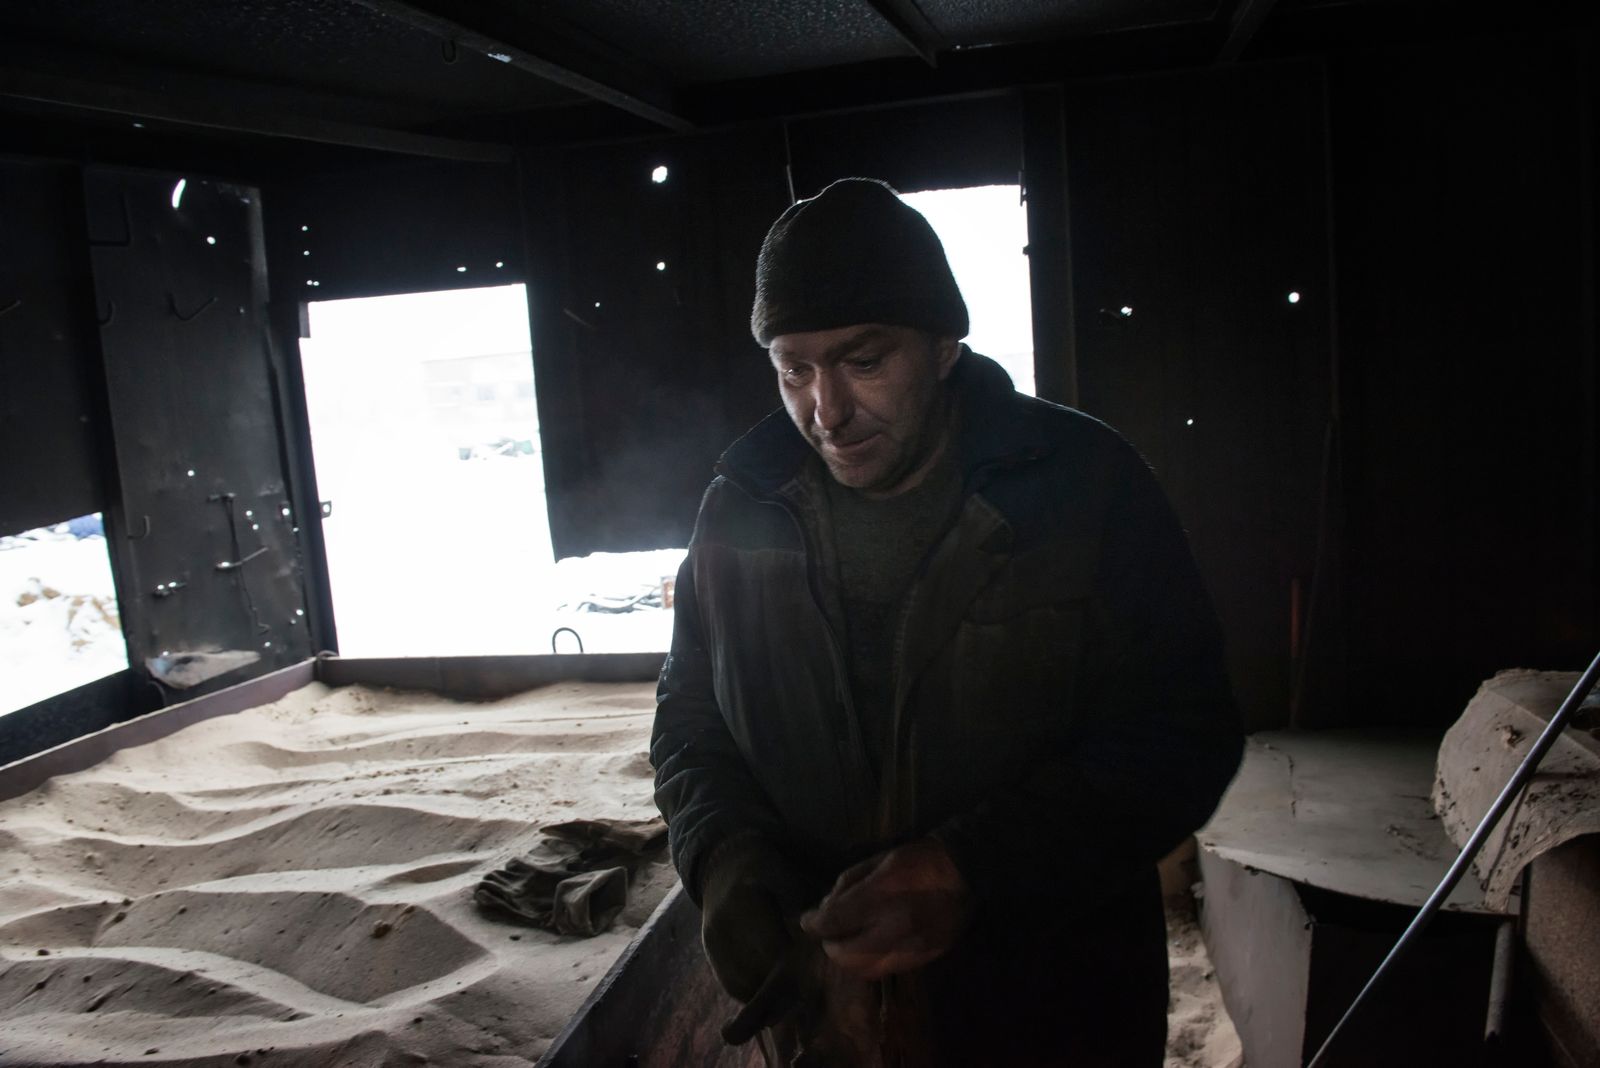 © Pierpaolo Mittica - Pavel while preparing the sand for the sandblasting